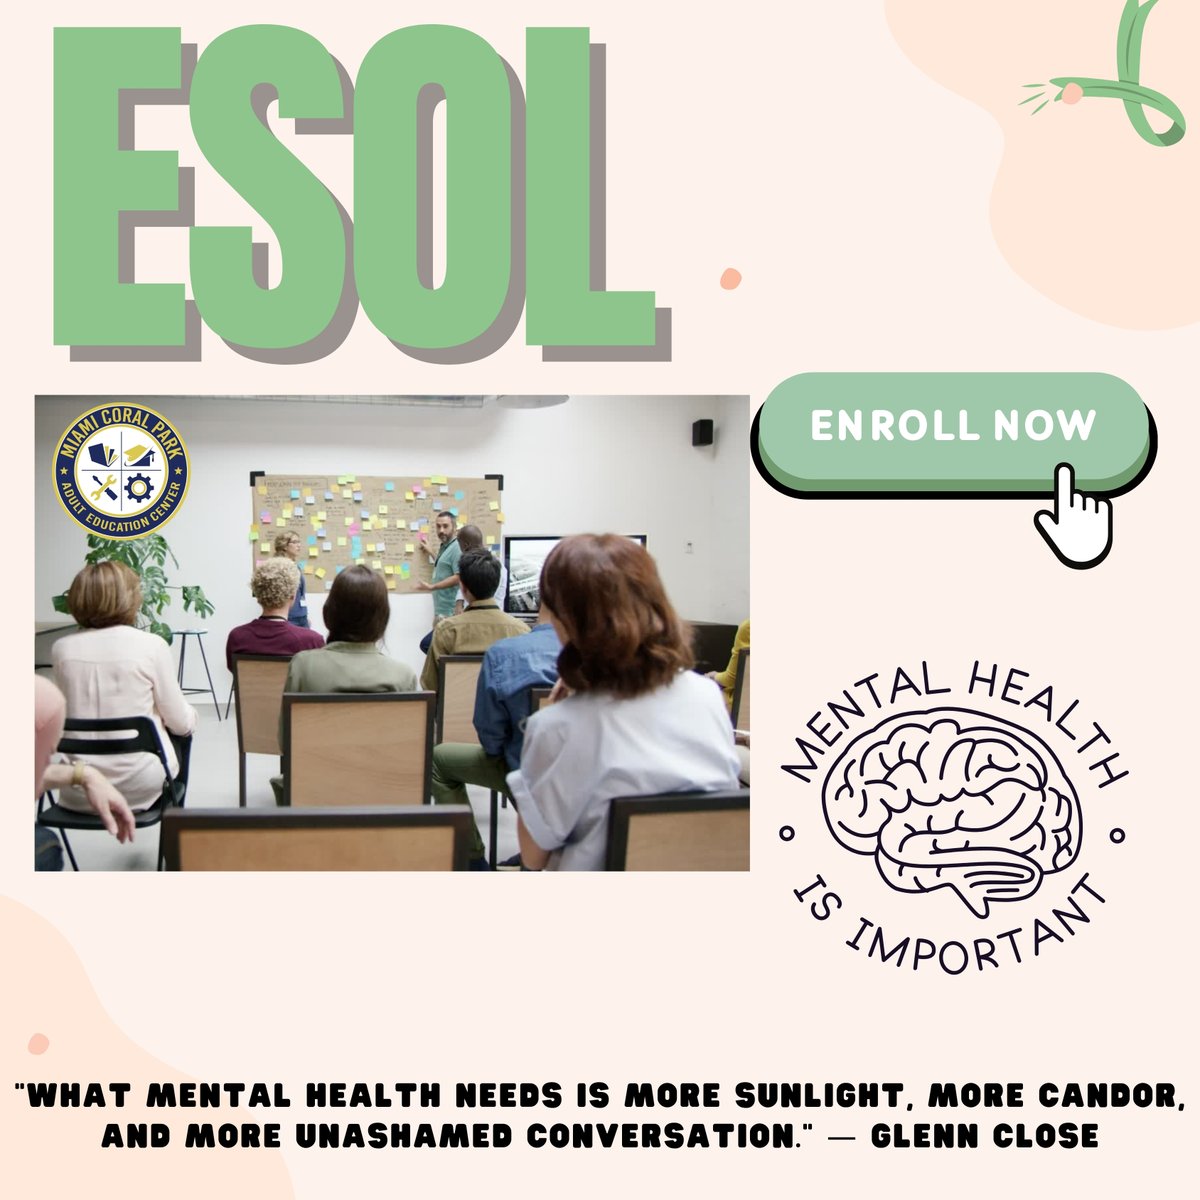 Take the first step towards your dream job! Enroll in our ESOL program at Coral Park Adult to improve your English, gain valuable workforce skills. Call 305-226-6565 EXT 2245 now! @SuptDotres @mantilla1776 @fox1914 @DrAThomasDupree @susymauri @ACEofFlorida #yourbestchoicemdcps